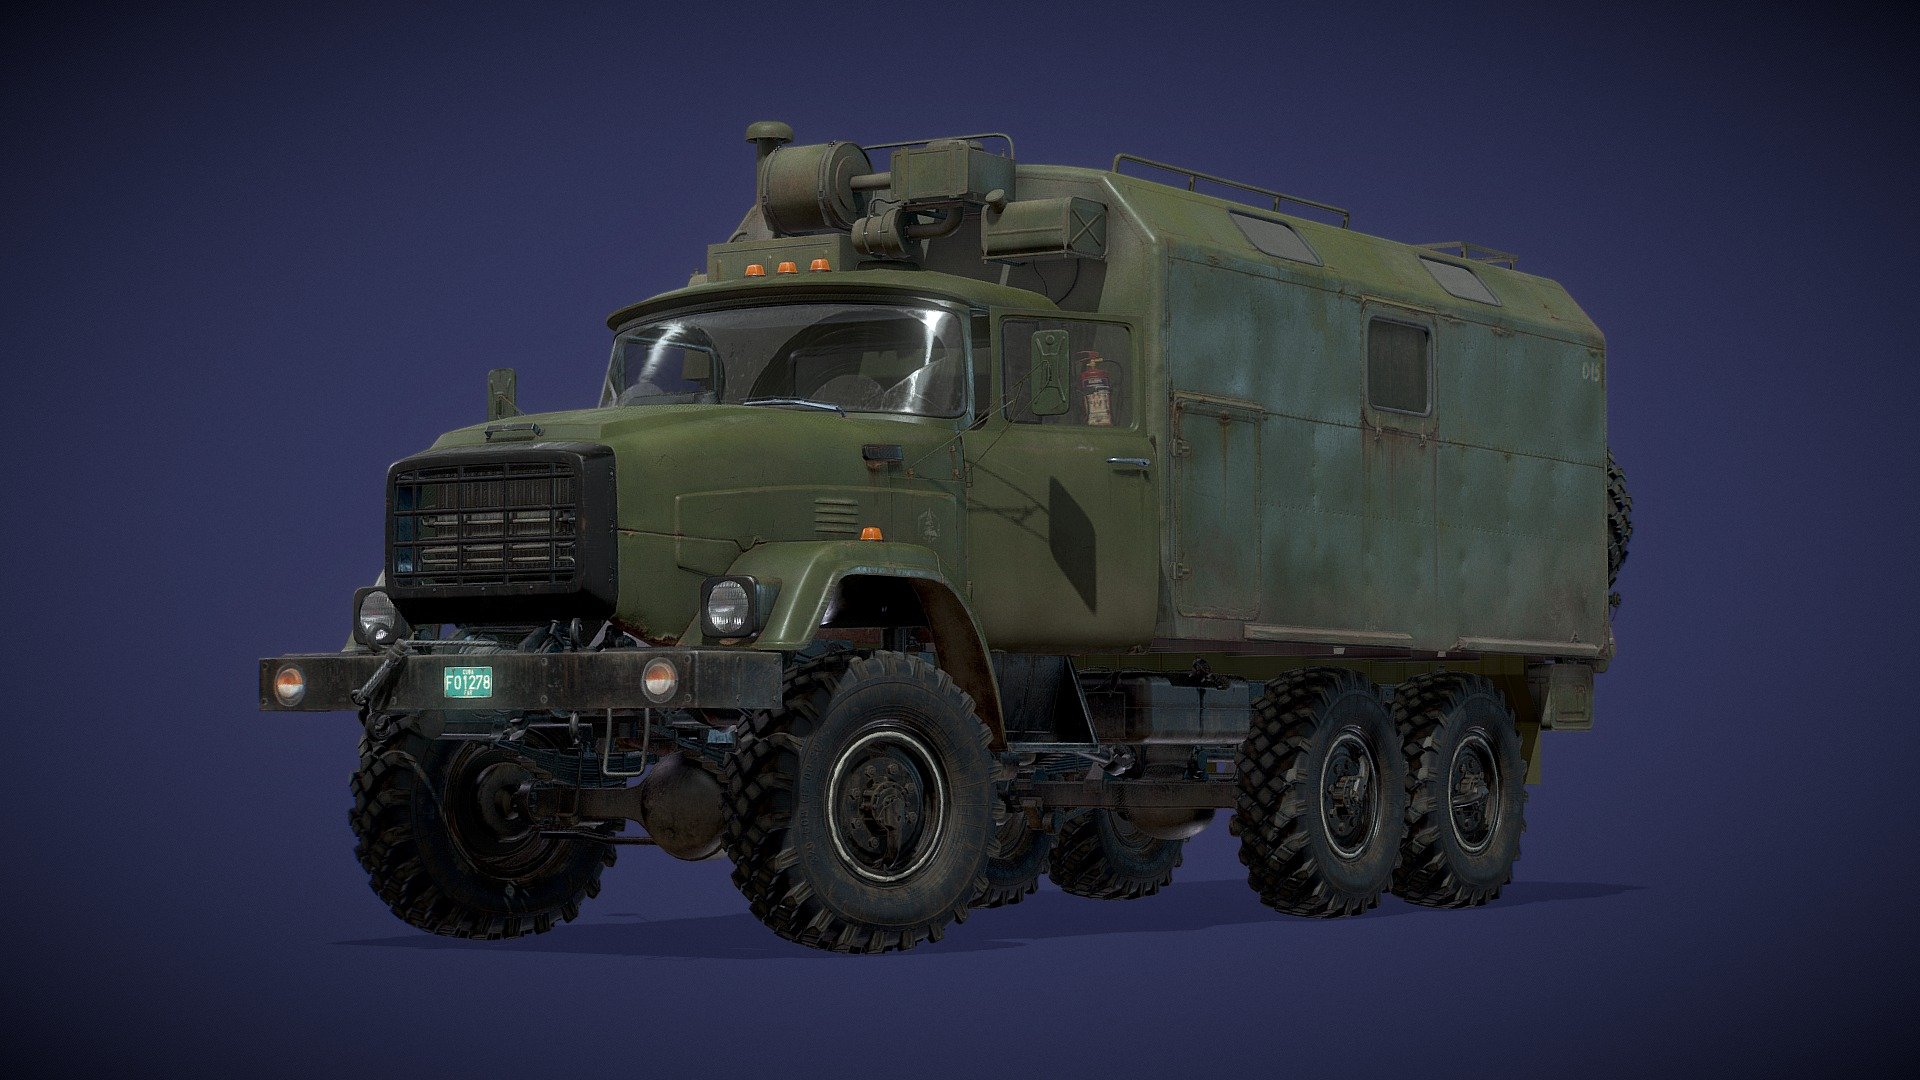 Russian inspired army truck, merging concepts of the famous ZIL-130 and the never-released ZIL-Э133ВЯТ. Made in Blender, sculpted in ZBrush, UVed in Rizom and textured in Substance Painter. Also, a huge shout out to PureRef that doesn’t get enough credit. Made the cab and interior using high-low baking workflow on top of weighted normals to allow for baking a sculpted HD mesh with dents and scuffs. The rest of the truck is using weighted normals only.

Very good quality interior, making it suitable for 1st person camera.

Game ready although the policount may not be the best for a background enviroment prop (unless you’re using Nanite).

The .blend file is included with the truck in its neutral possition, the tires undeformed and high resolution .tga textures. It is organized in collections containing the different truck parts to allow for easier creation and export of new interchangeable parts like Bumpers, Frame addons, tires, etc.

Ray traced full res renders: https://www.artstation.com/artwork/14kRNZ - DCB K-133BYAT (Unbranded) Utility Attachment - Buy Royalty Free 3D model by Axel Roman (@DeathCoreBoy1) 3d model